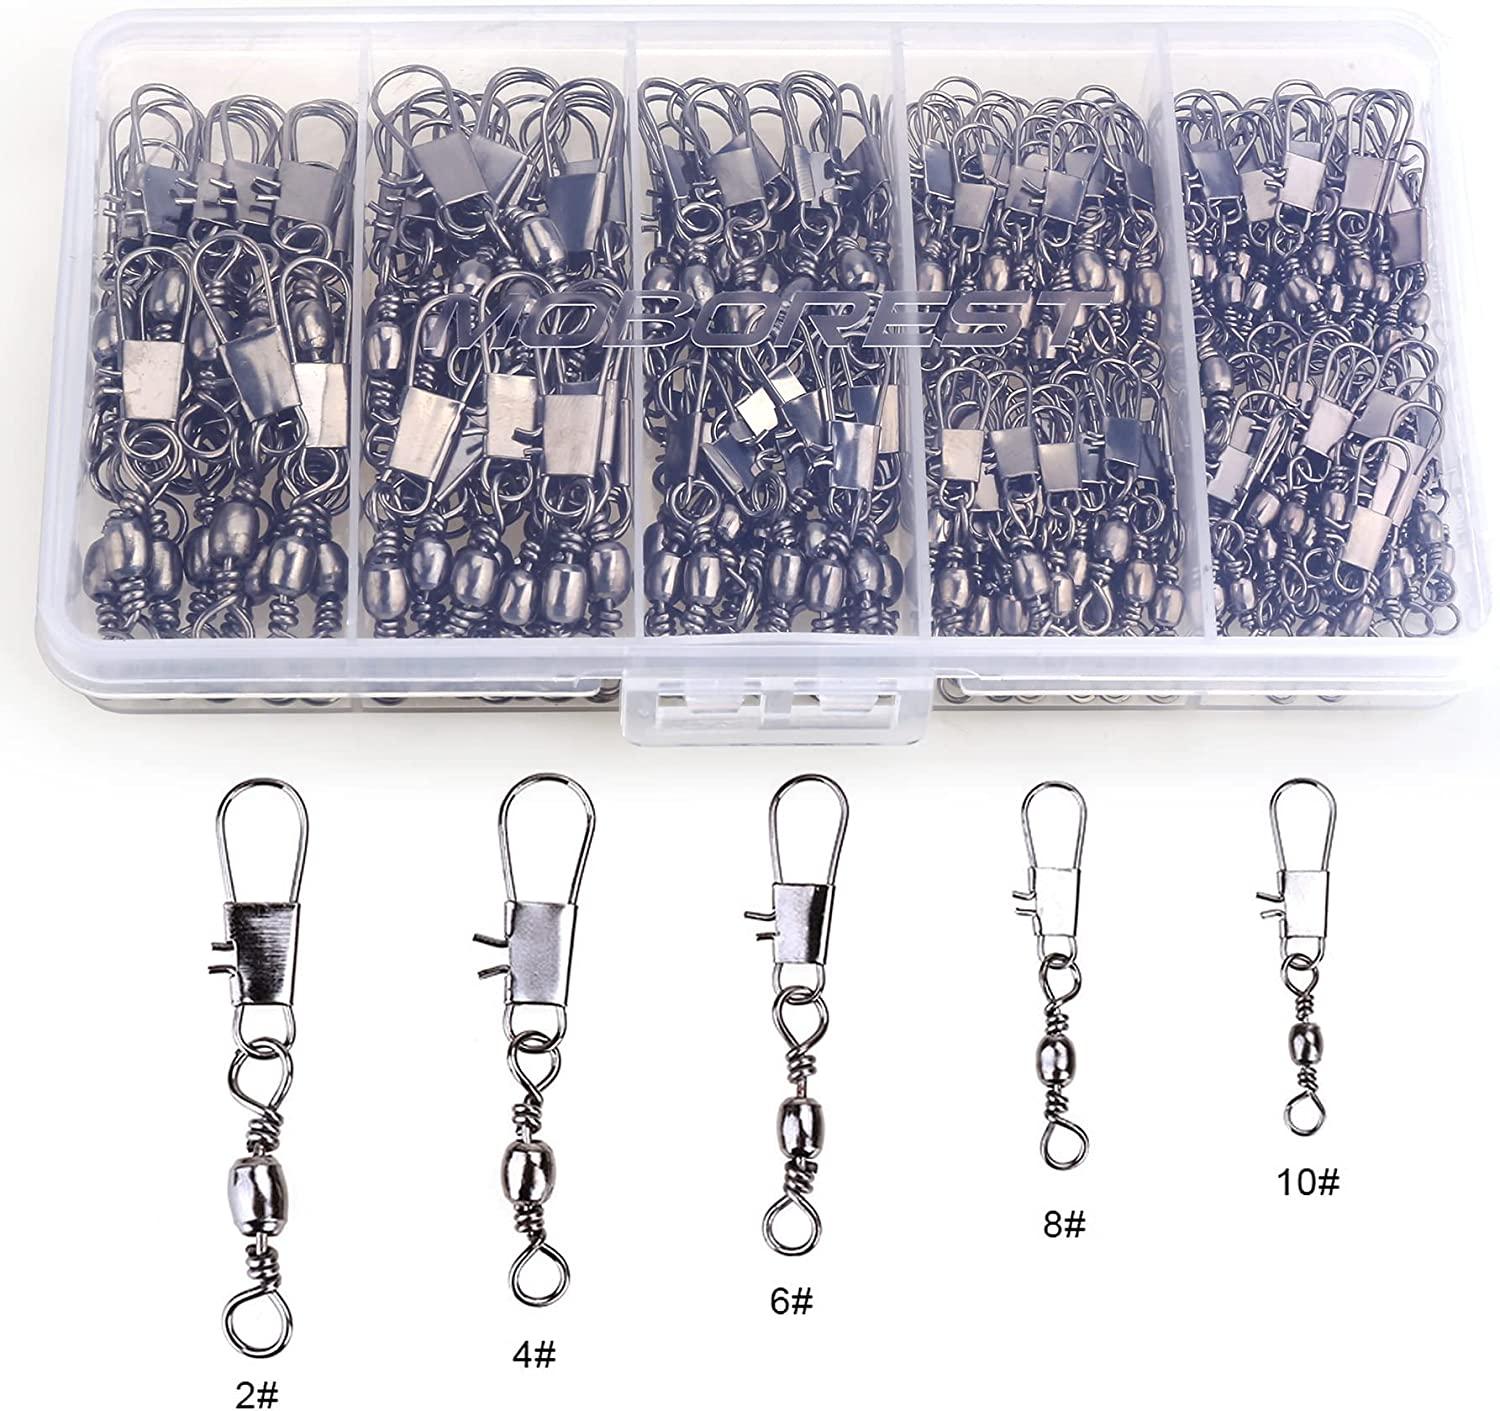 MOBOREST 200PCS Barrel Snap Swivel Fishing Accessories, Premium Fishing  Gear Equipment with Ball Bearing Swivels Snaps Connector for Quick Connect Fishing  Lures